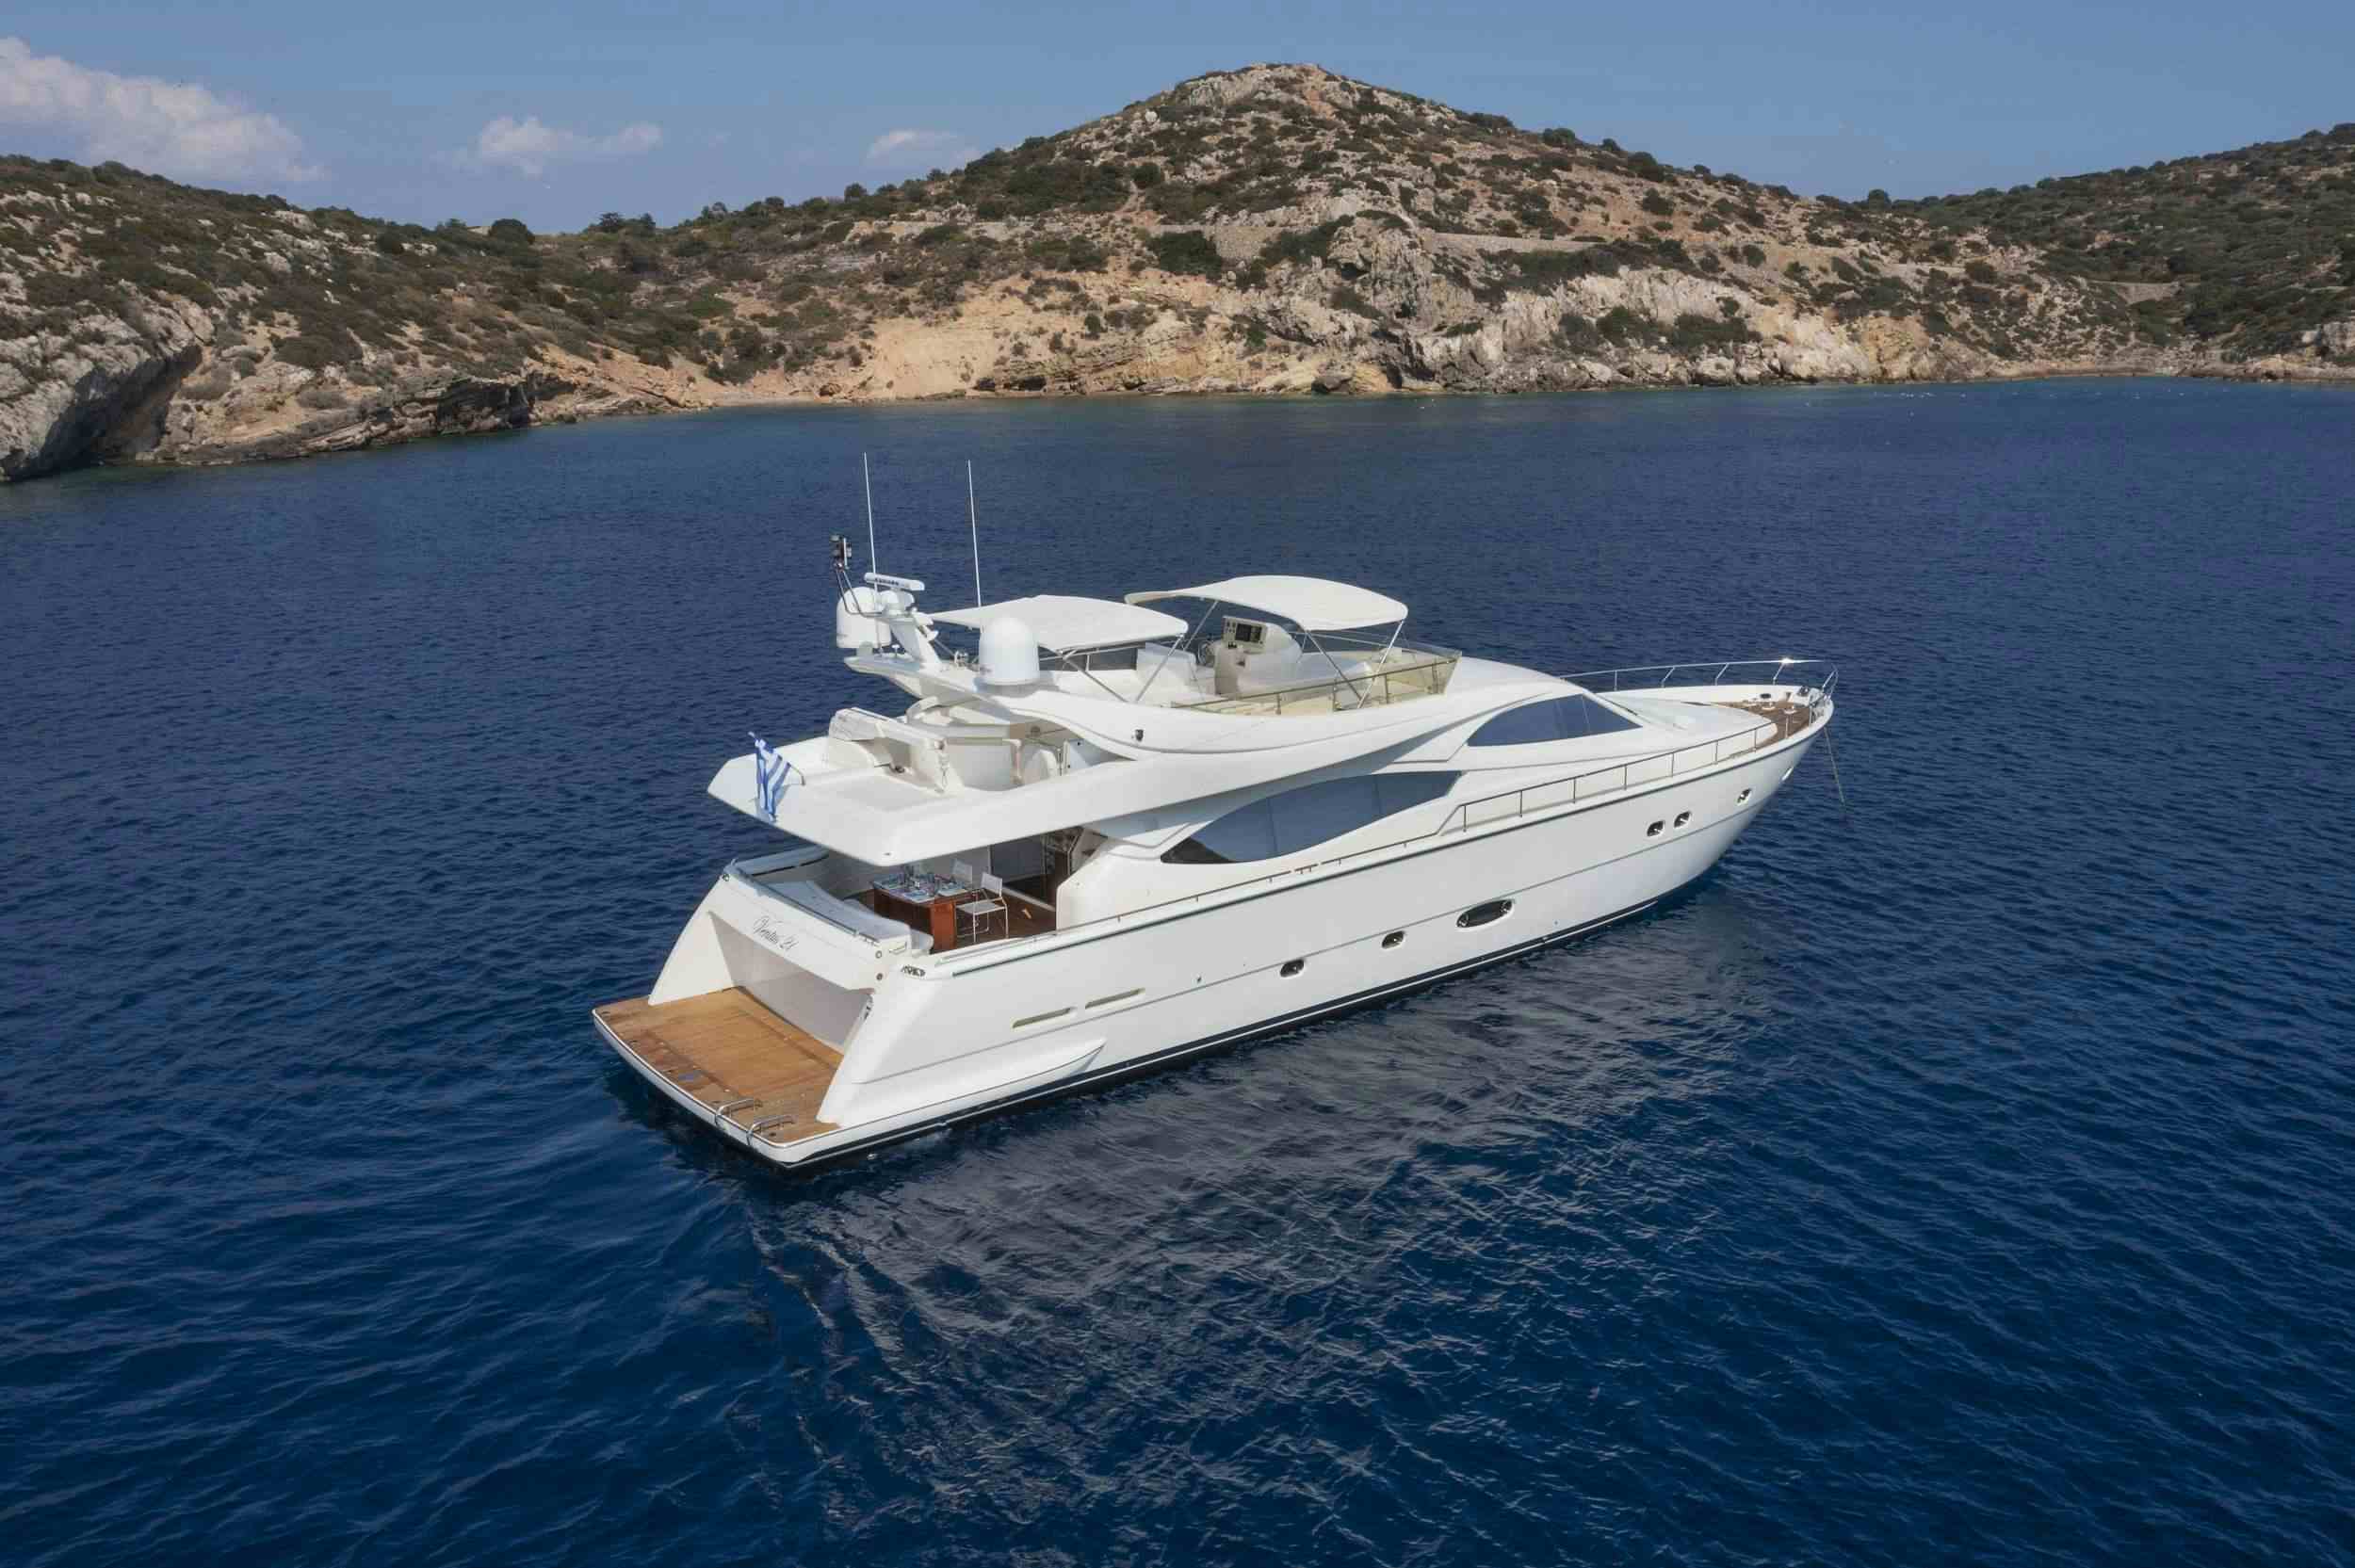 Ventus 21 - Yacht Charter Skiathos & Boat hire in Greece 1